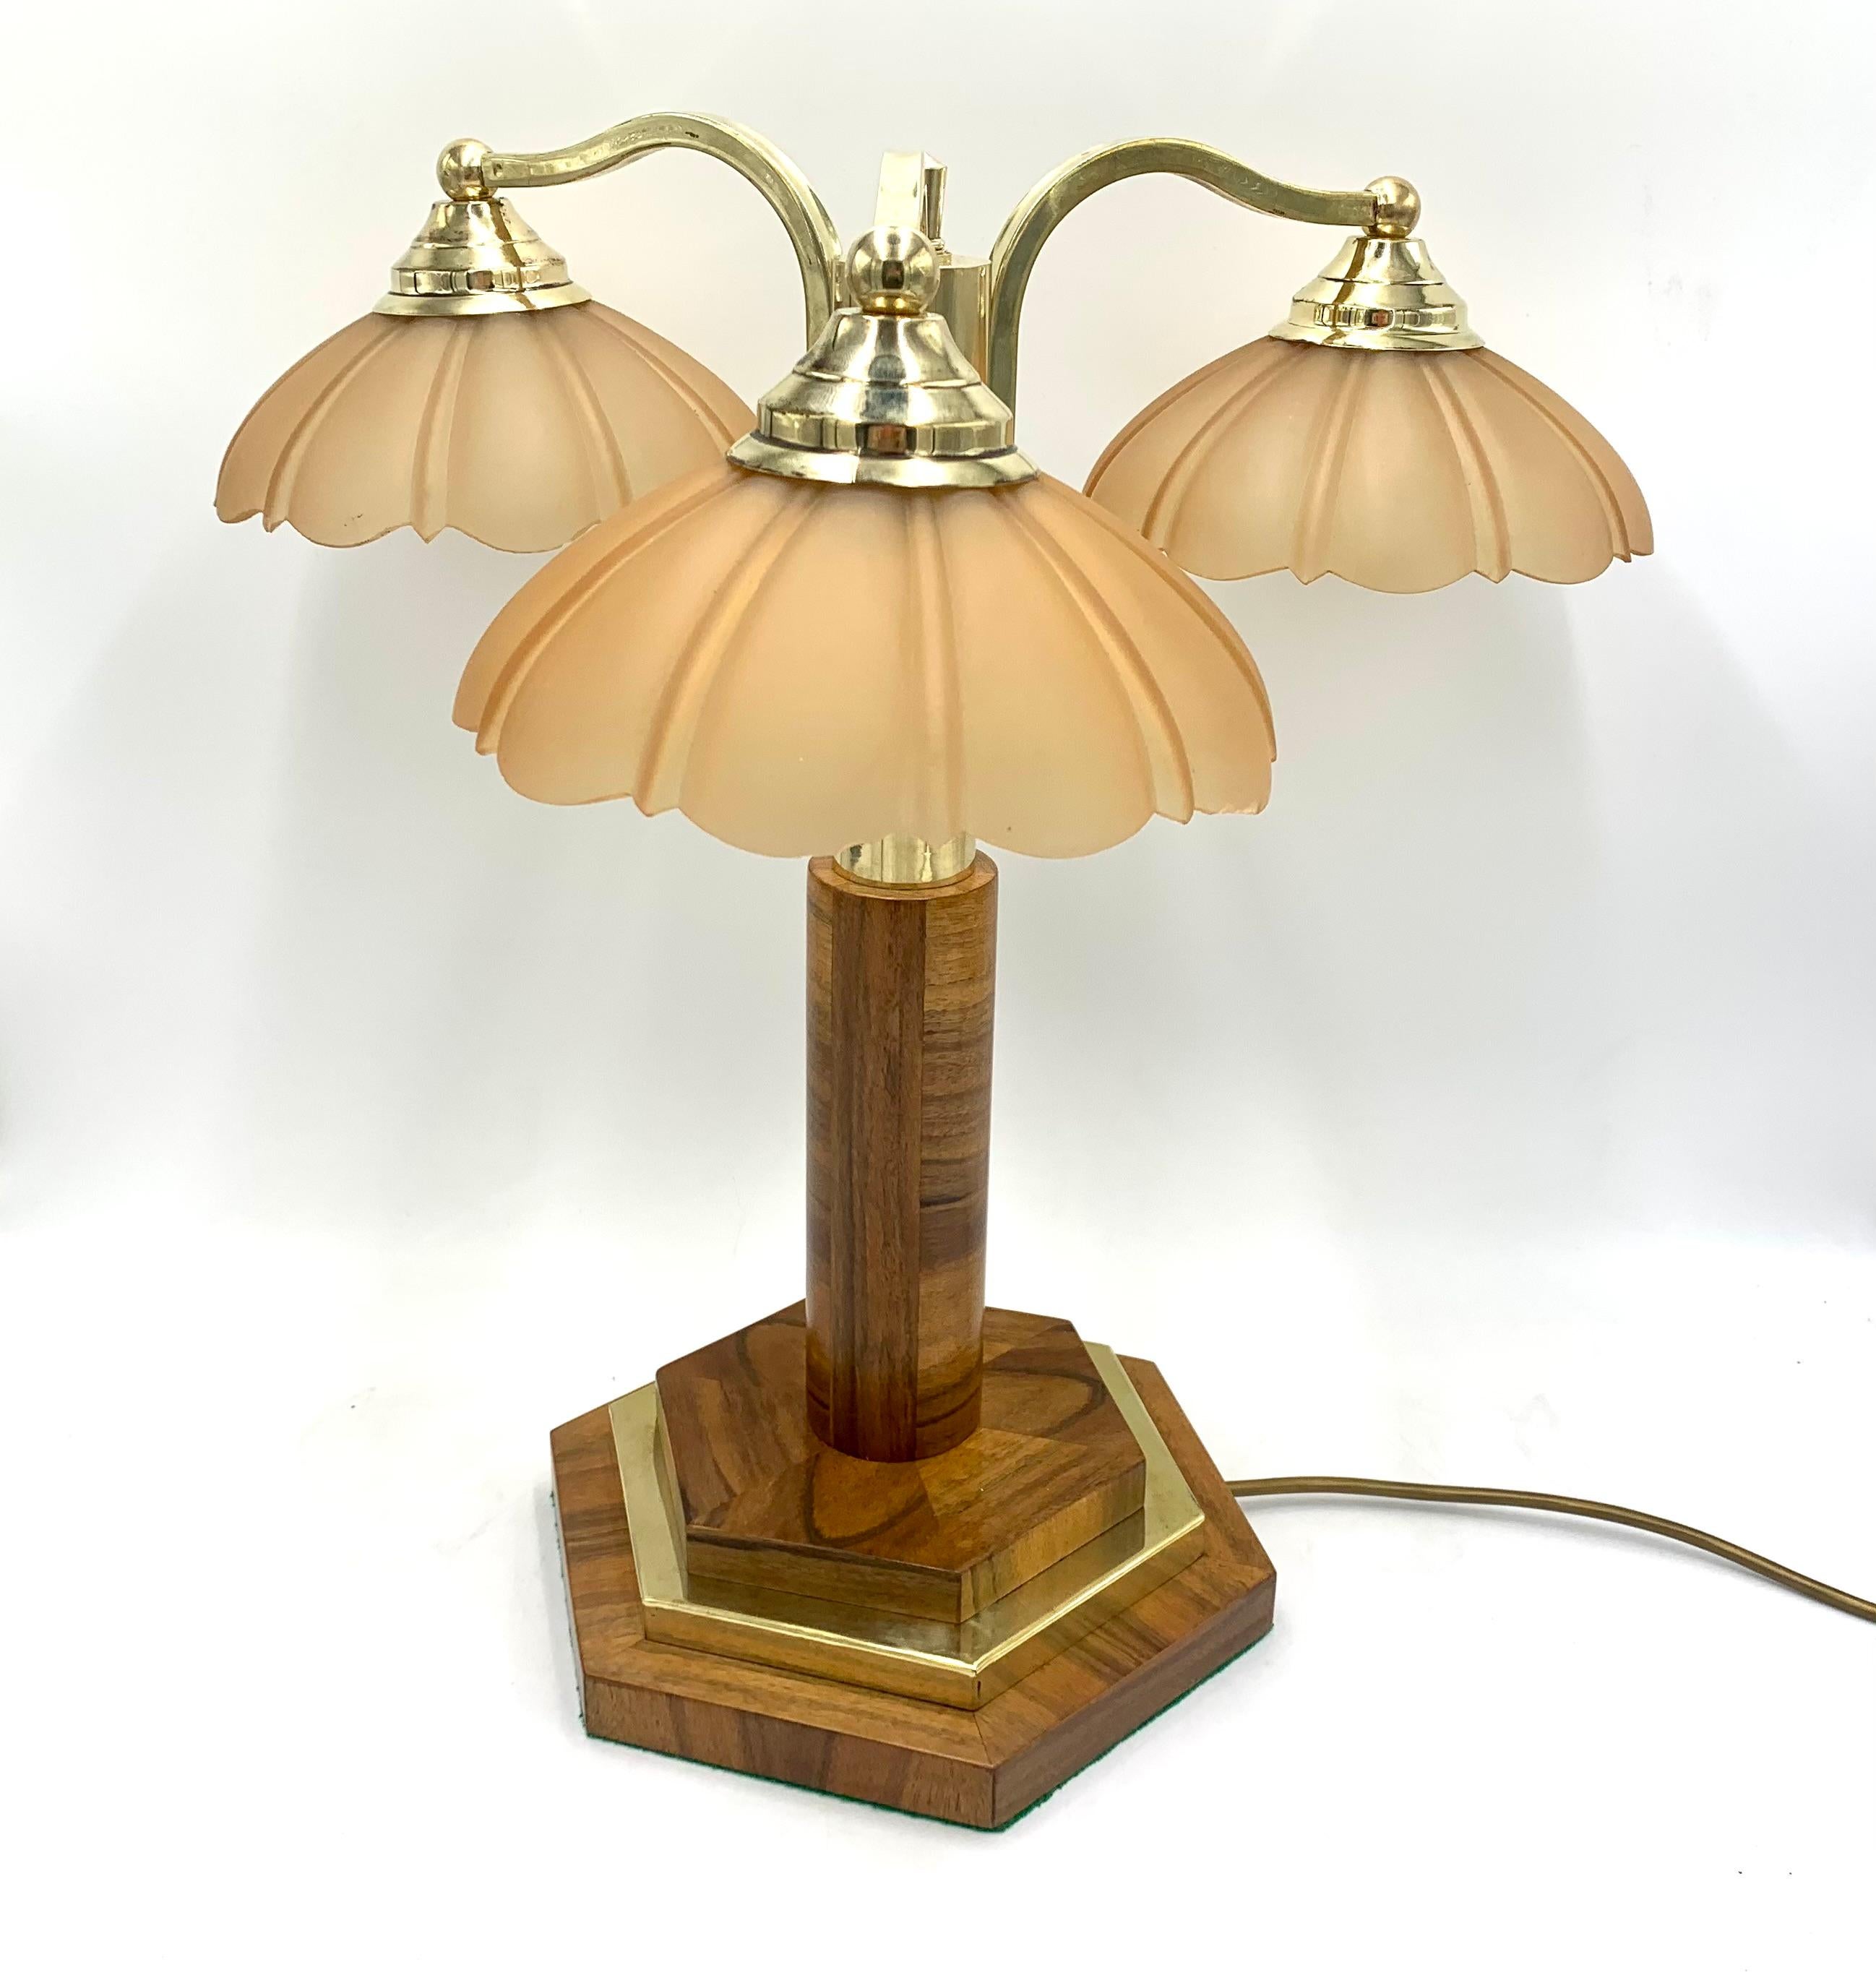 Art Deco table lamp with three beige glass shades.

Made in Poland in the 1950s.

The posture will be made of walnut wood finished in varnish.

New cable.

Very good condition.

Measures: Height: 47cm diameter of the base: 25cm diameter of